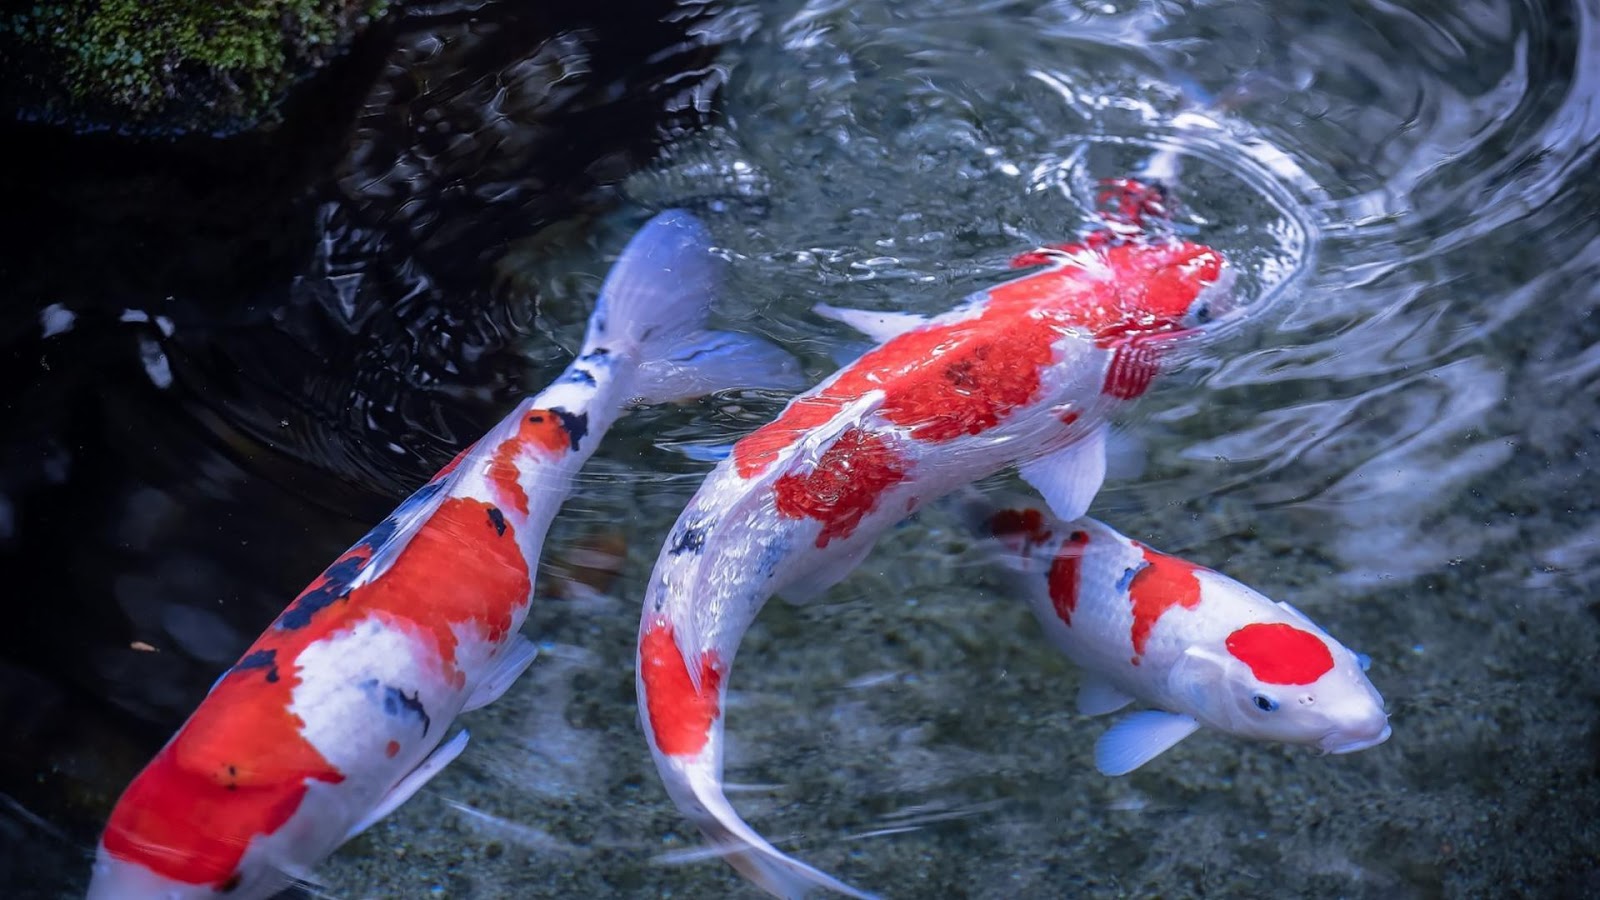 Koi Fish Live Wallpaper Android Apps On Google Play